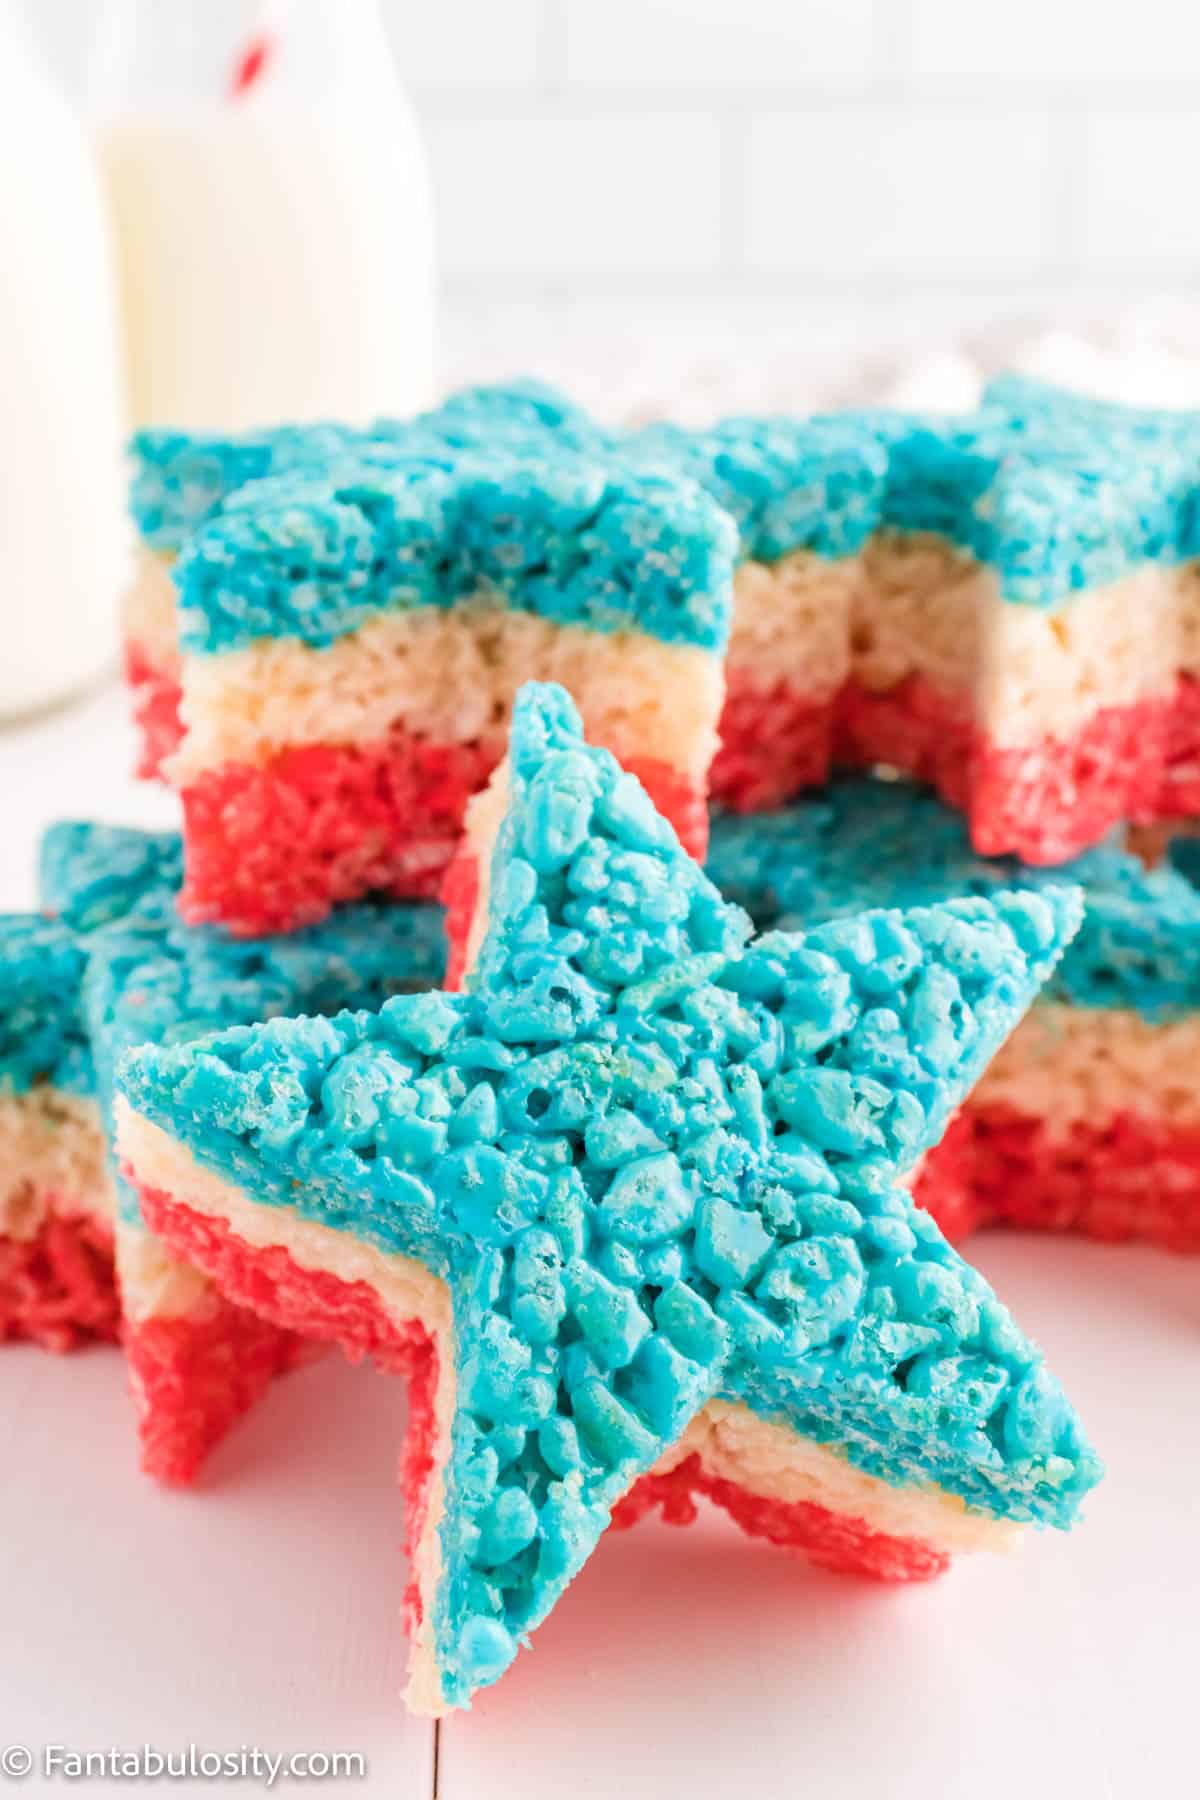 A stack of Rice Krispie treats shaped like stars that clearly show three layers - red, white, and blue.